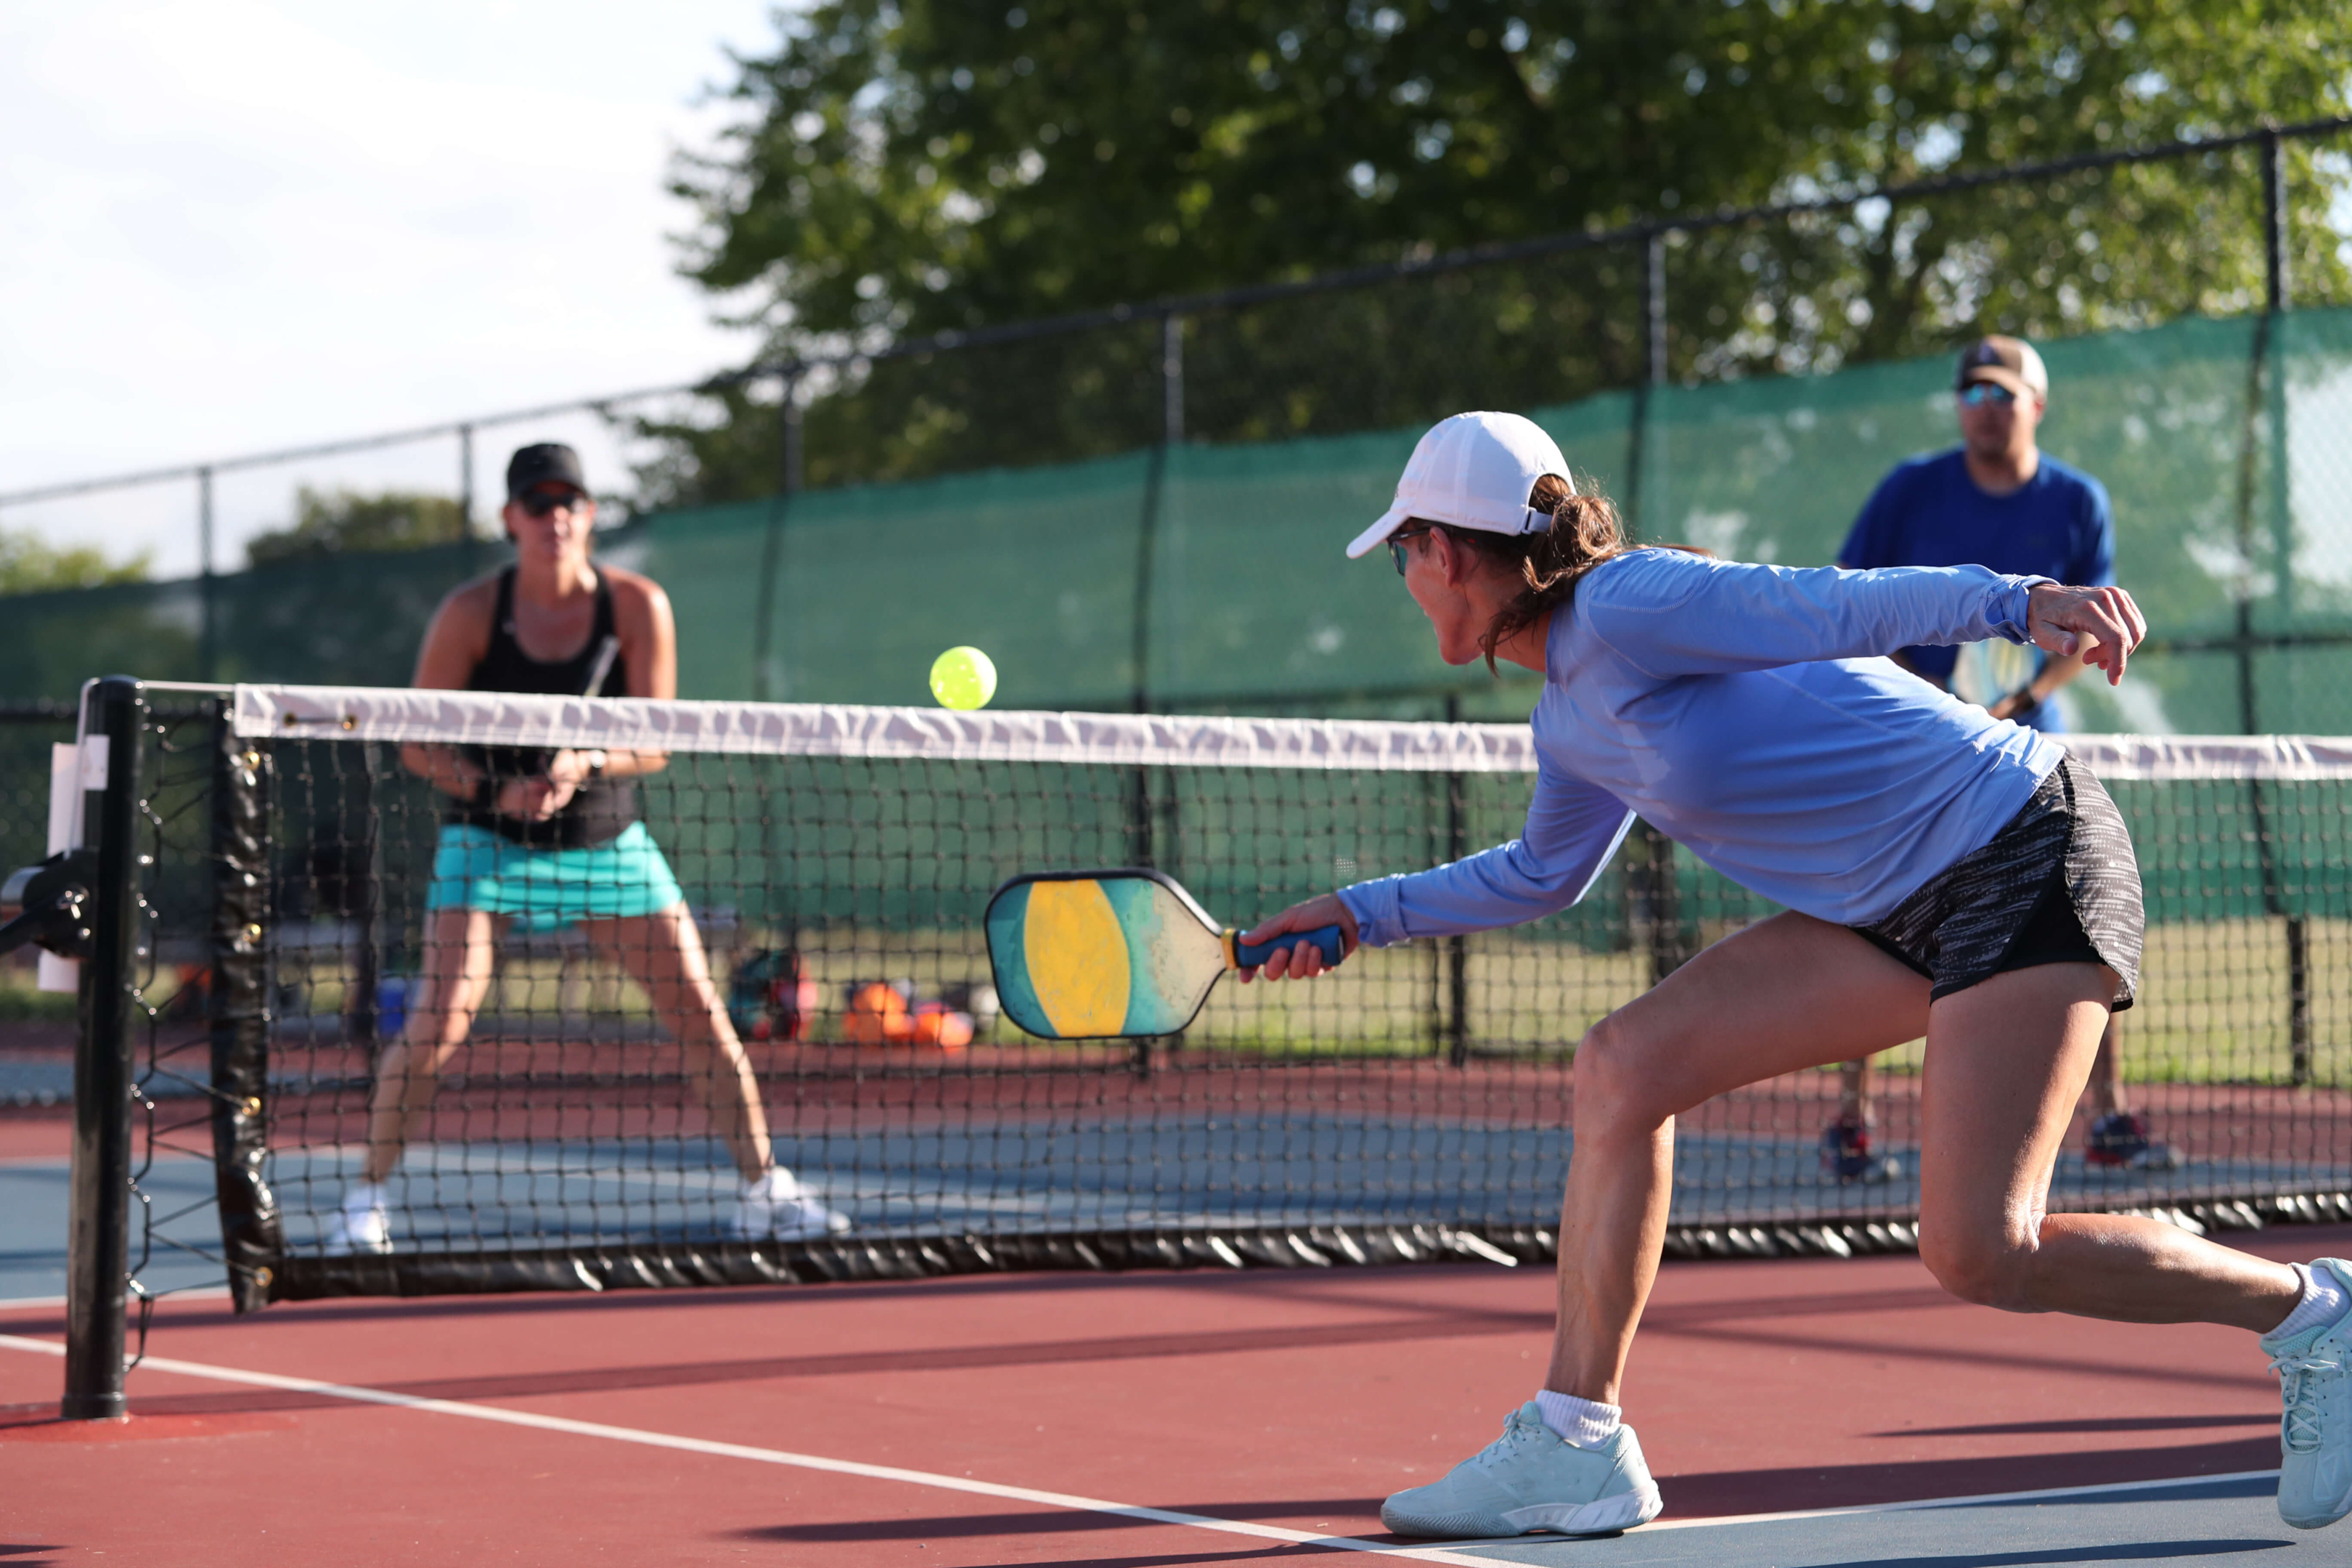 An enthusiastic woman preparing to strike a pickleball with her paddle during a game.